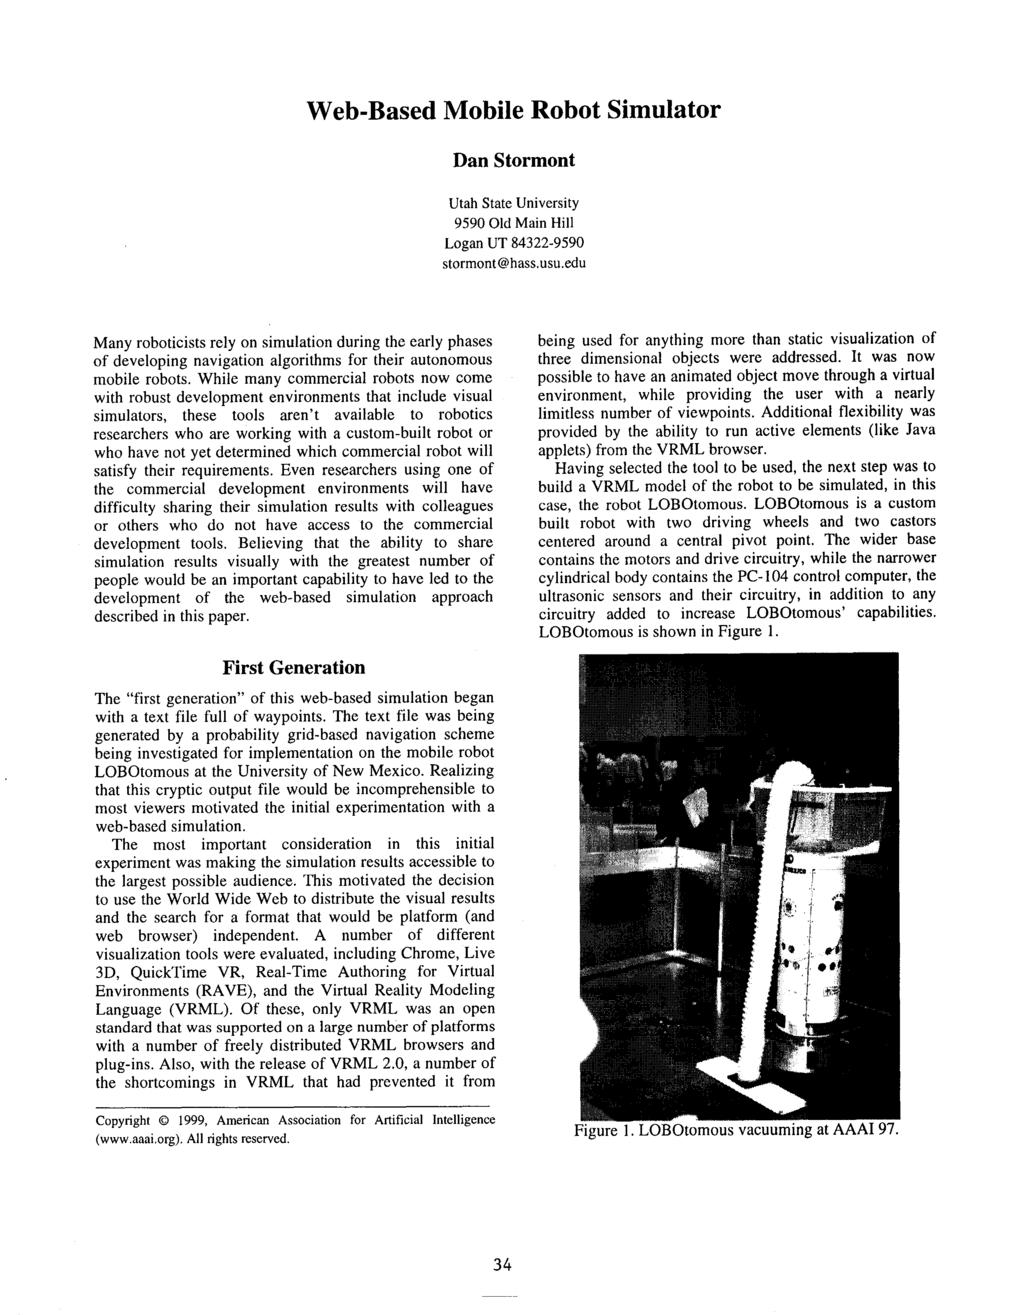 Web-Based Mobile Robot Simulator From: AAAI Technical Report WS-99-15. Compilation copyright 1999, AAAI (www.aaai.org). All rights reserved.